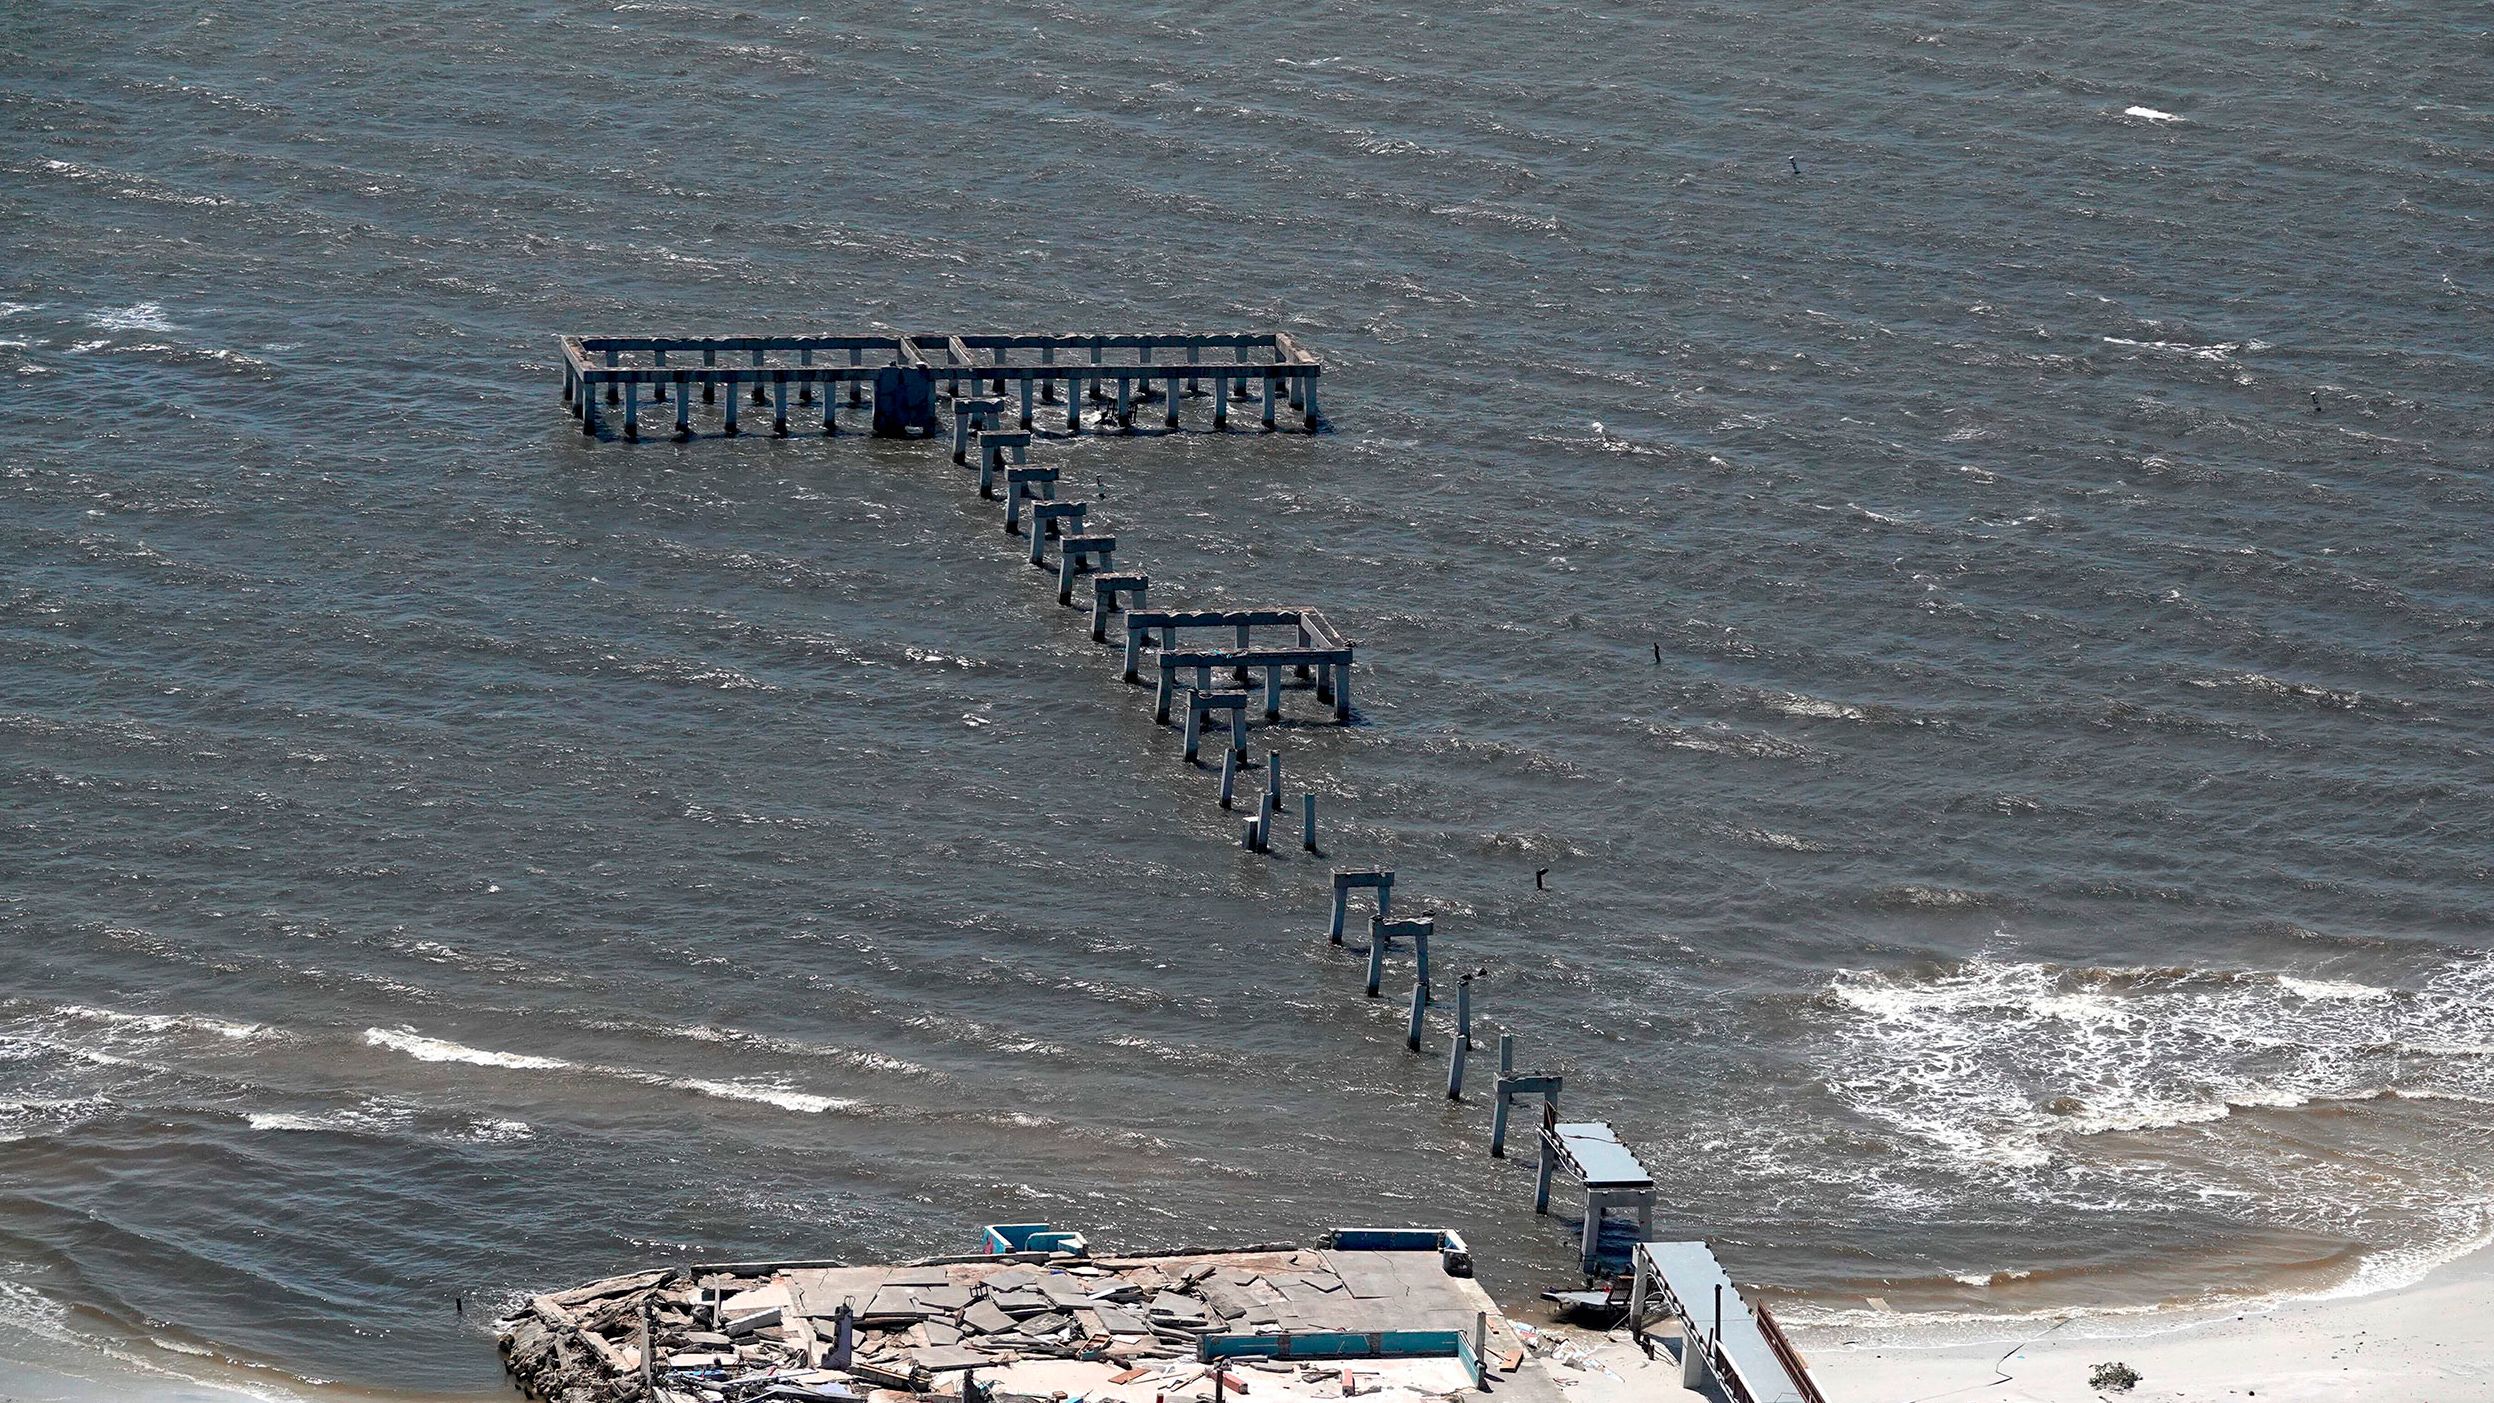 The fishing pier at Fort Myers Beach after Hurricane Ian struck the community on the Gulf of Mexico.